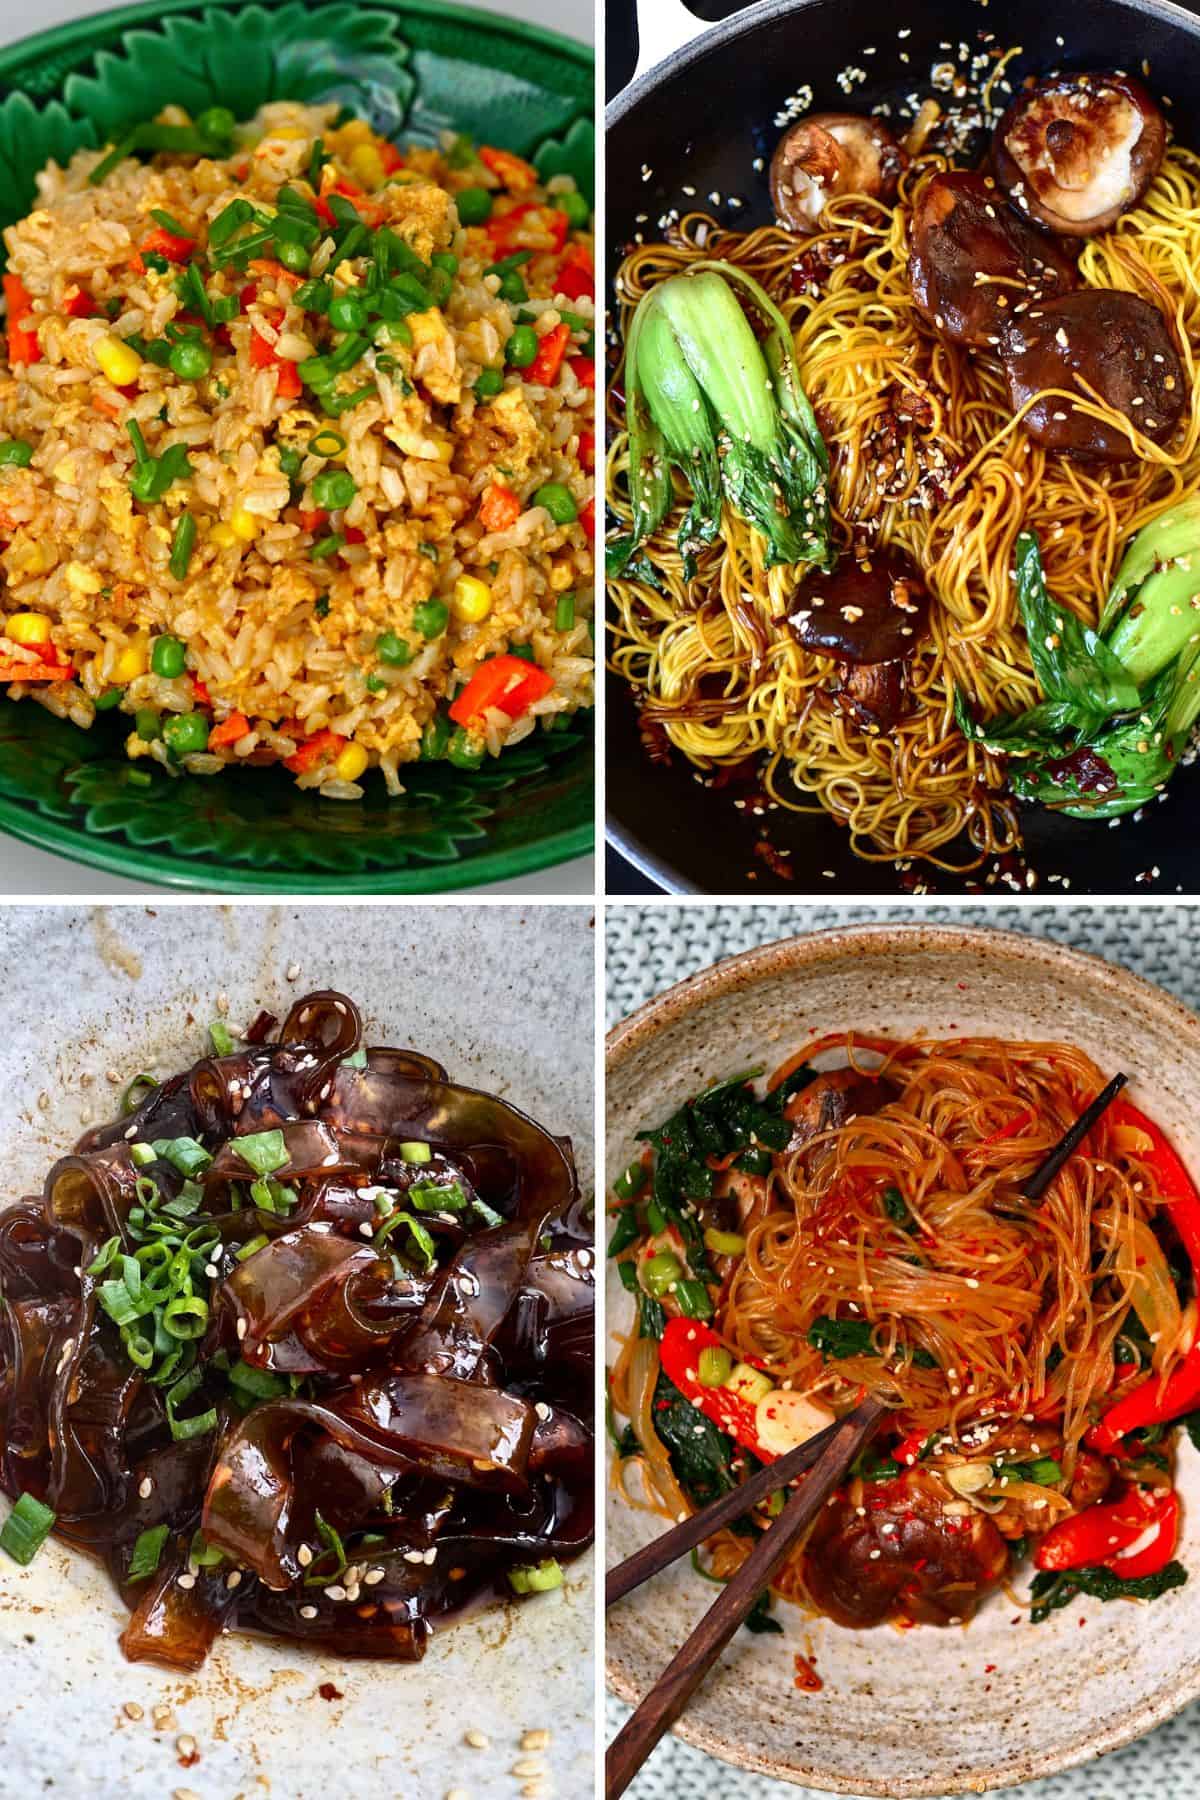 Rice and Noodles as hot lunch ideas